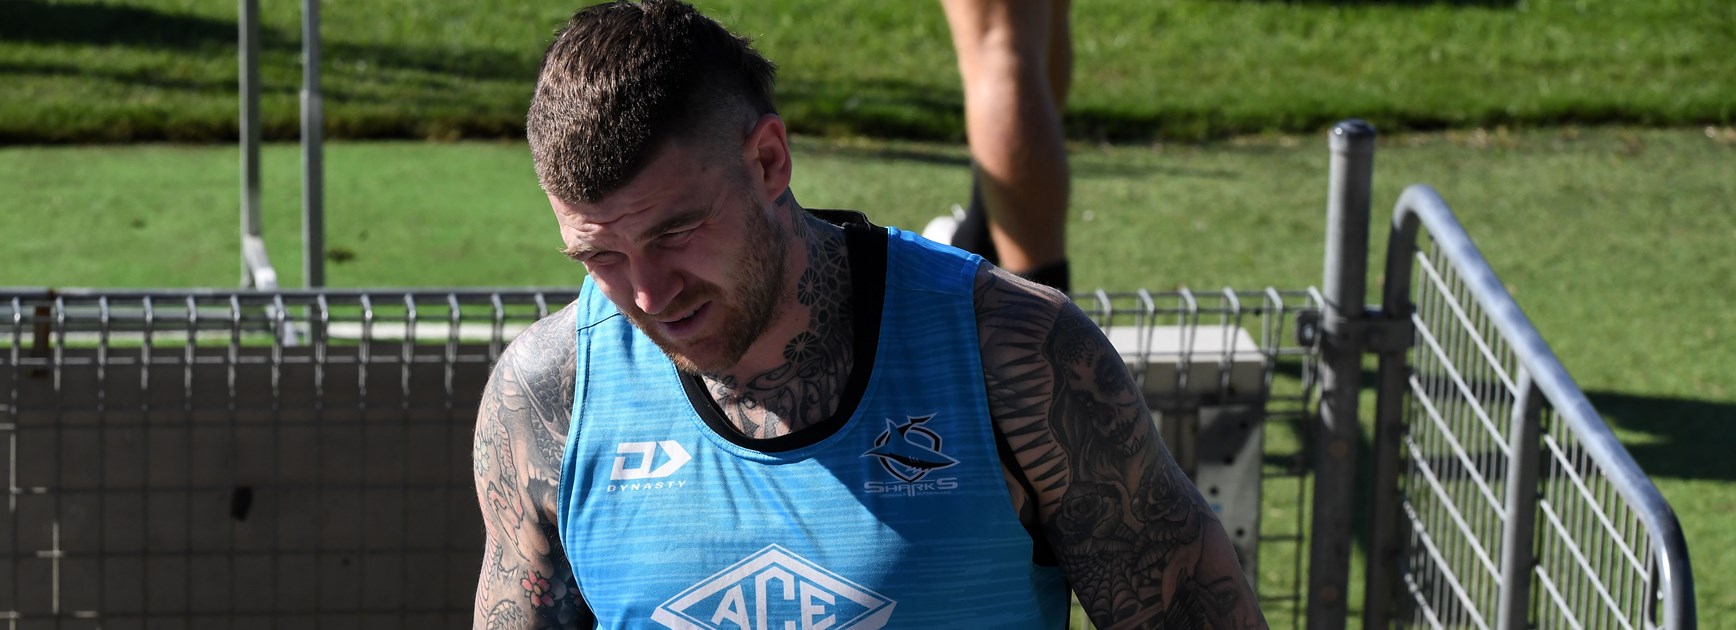 'Bit of a scare': Dugan relieved after avoiding serious neck injury